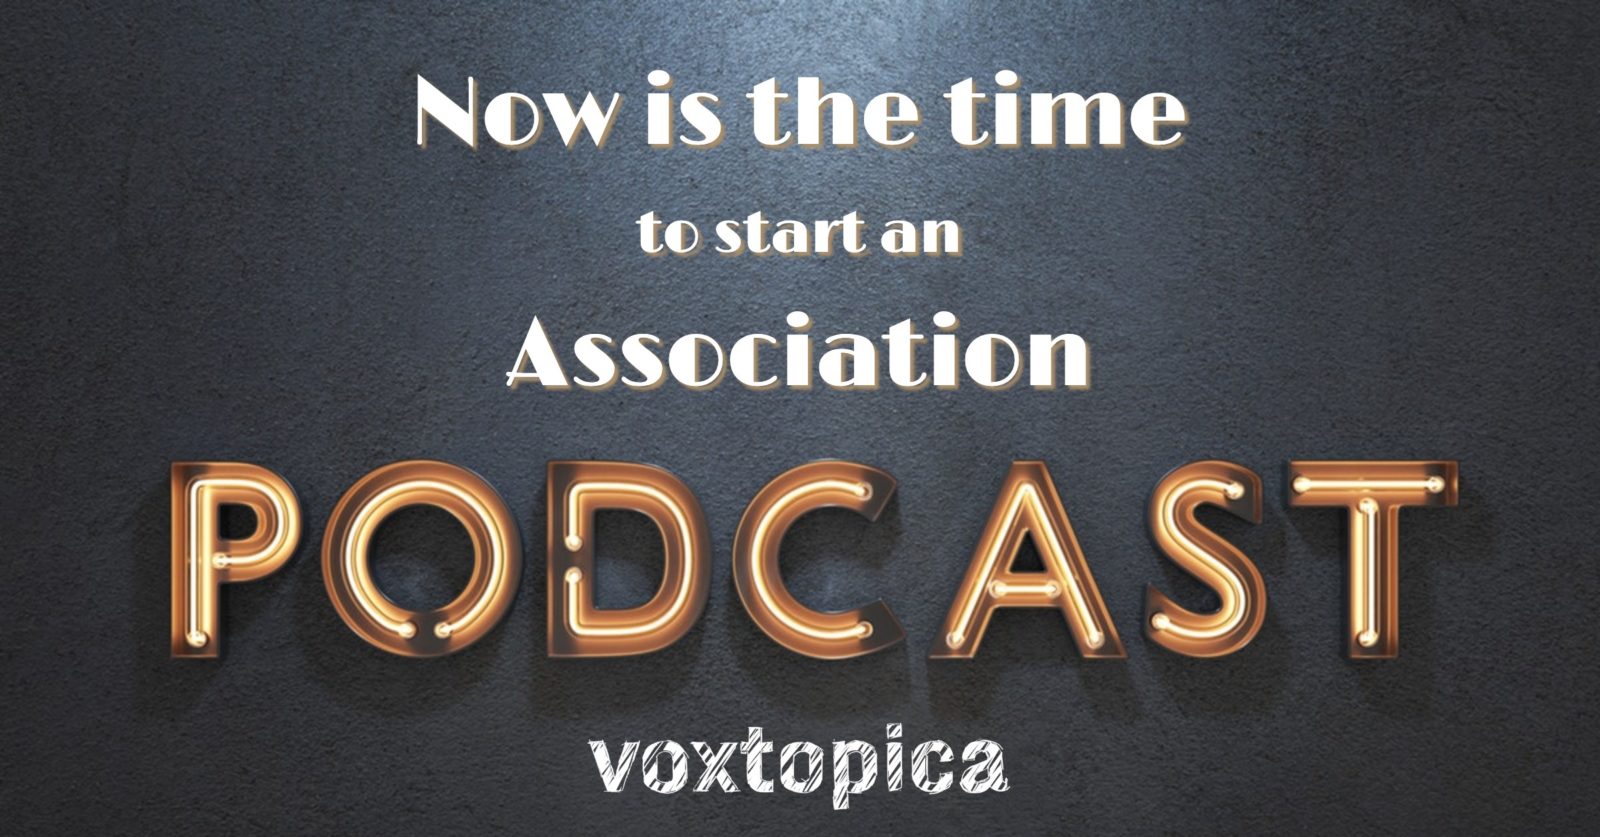 5 Reasons to Start an Association Podcast Right Now